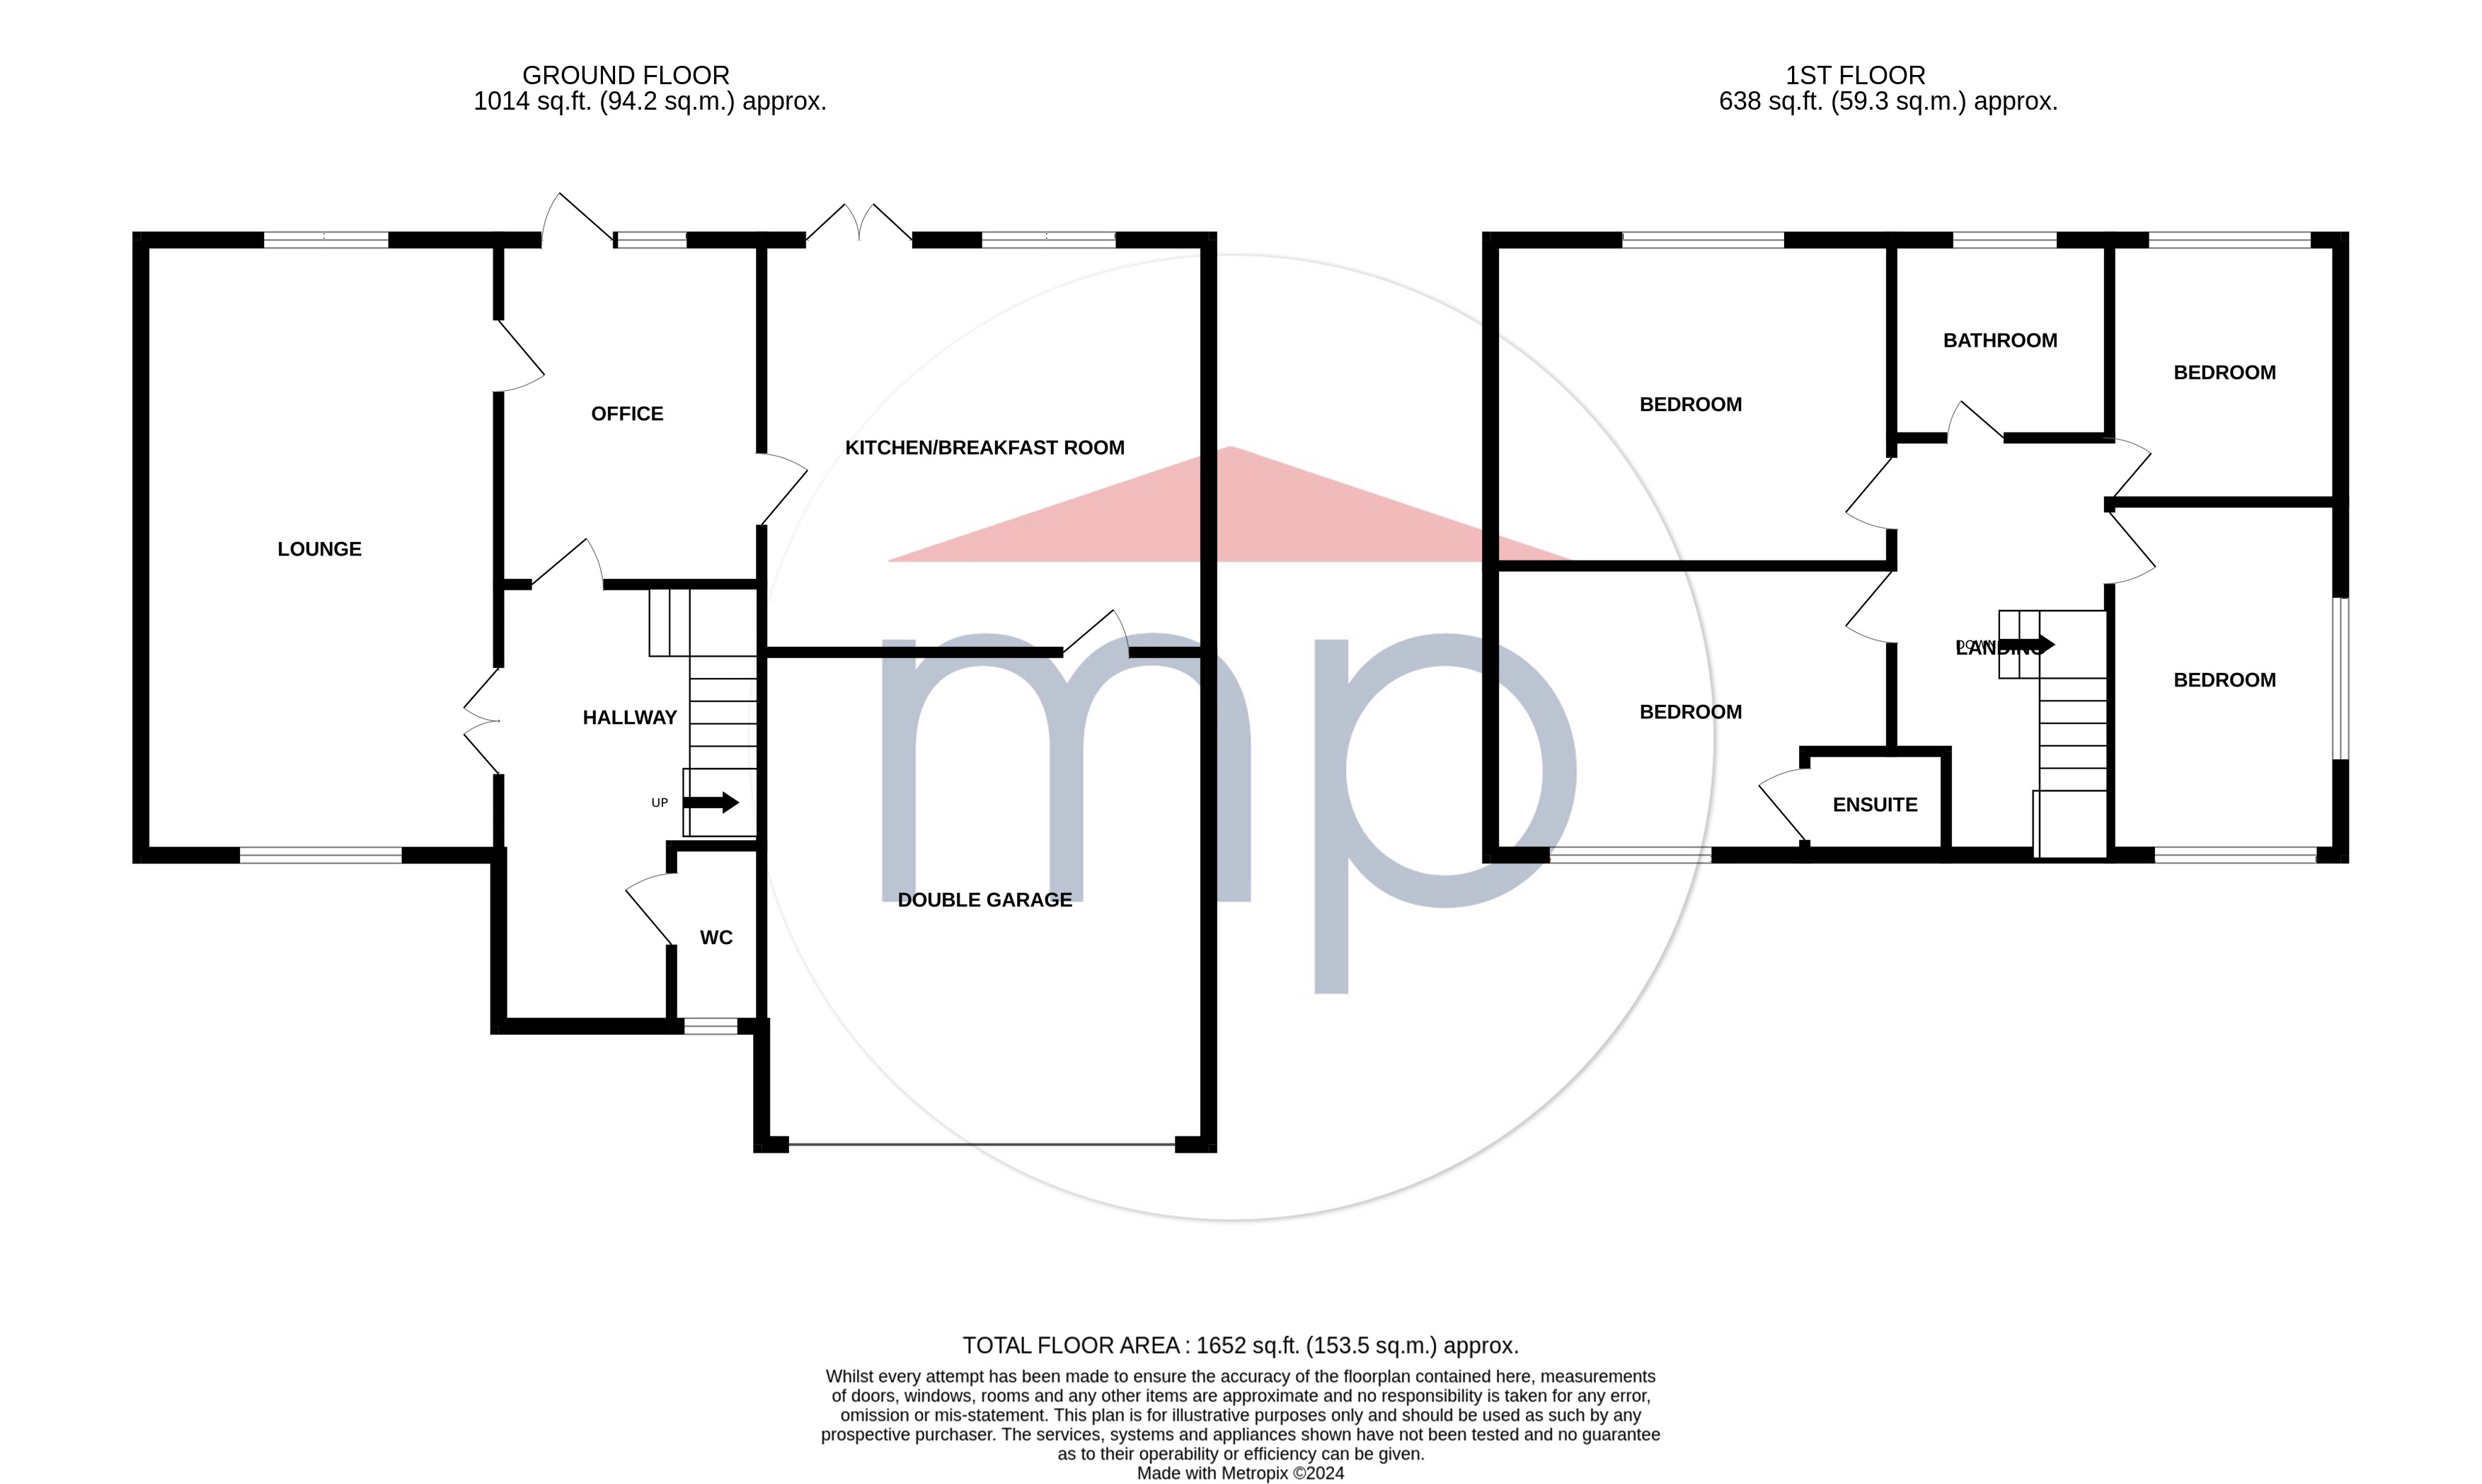 4 bed house to rent - Property floorplan